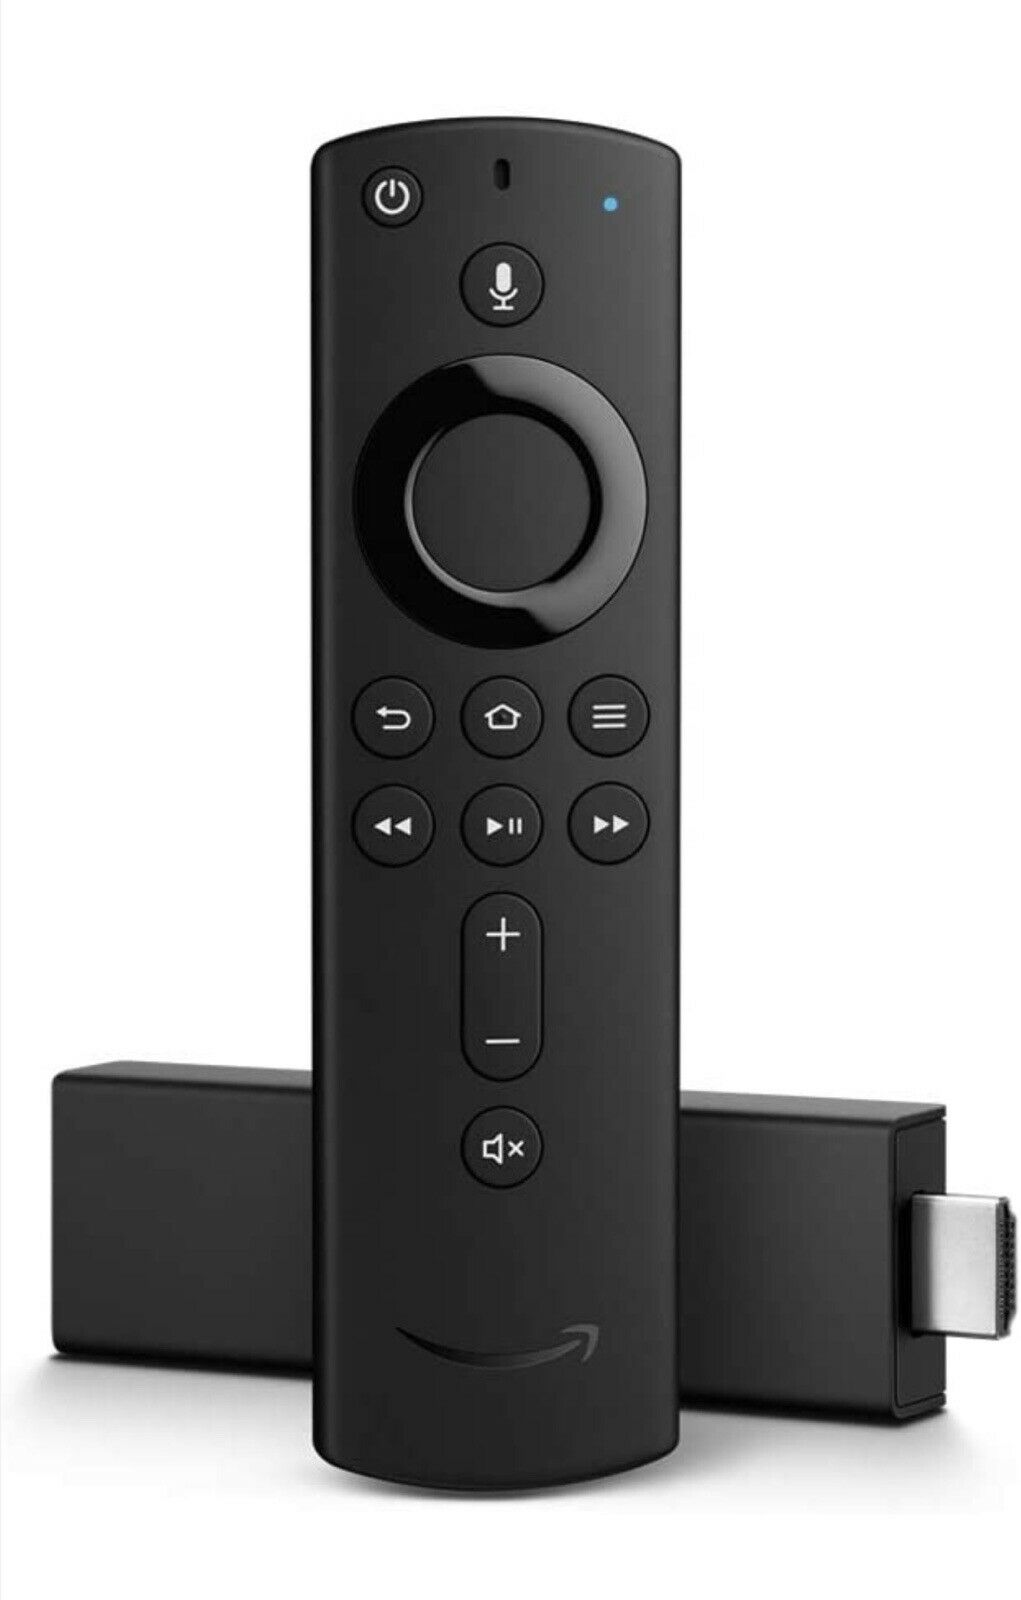 Fire TV Stick 4K streaming device with Alexa Voice Remote (includes TV controls)